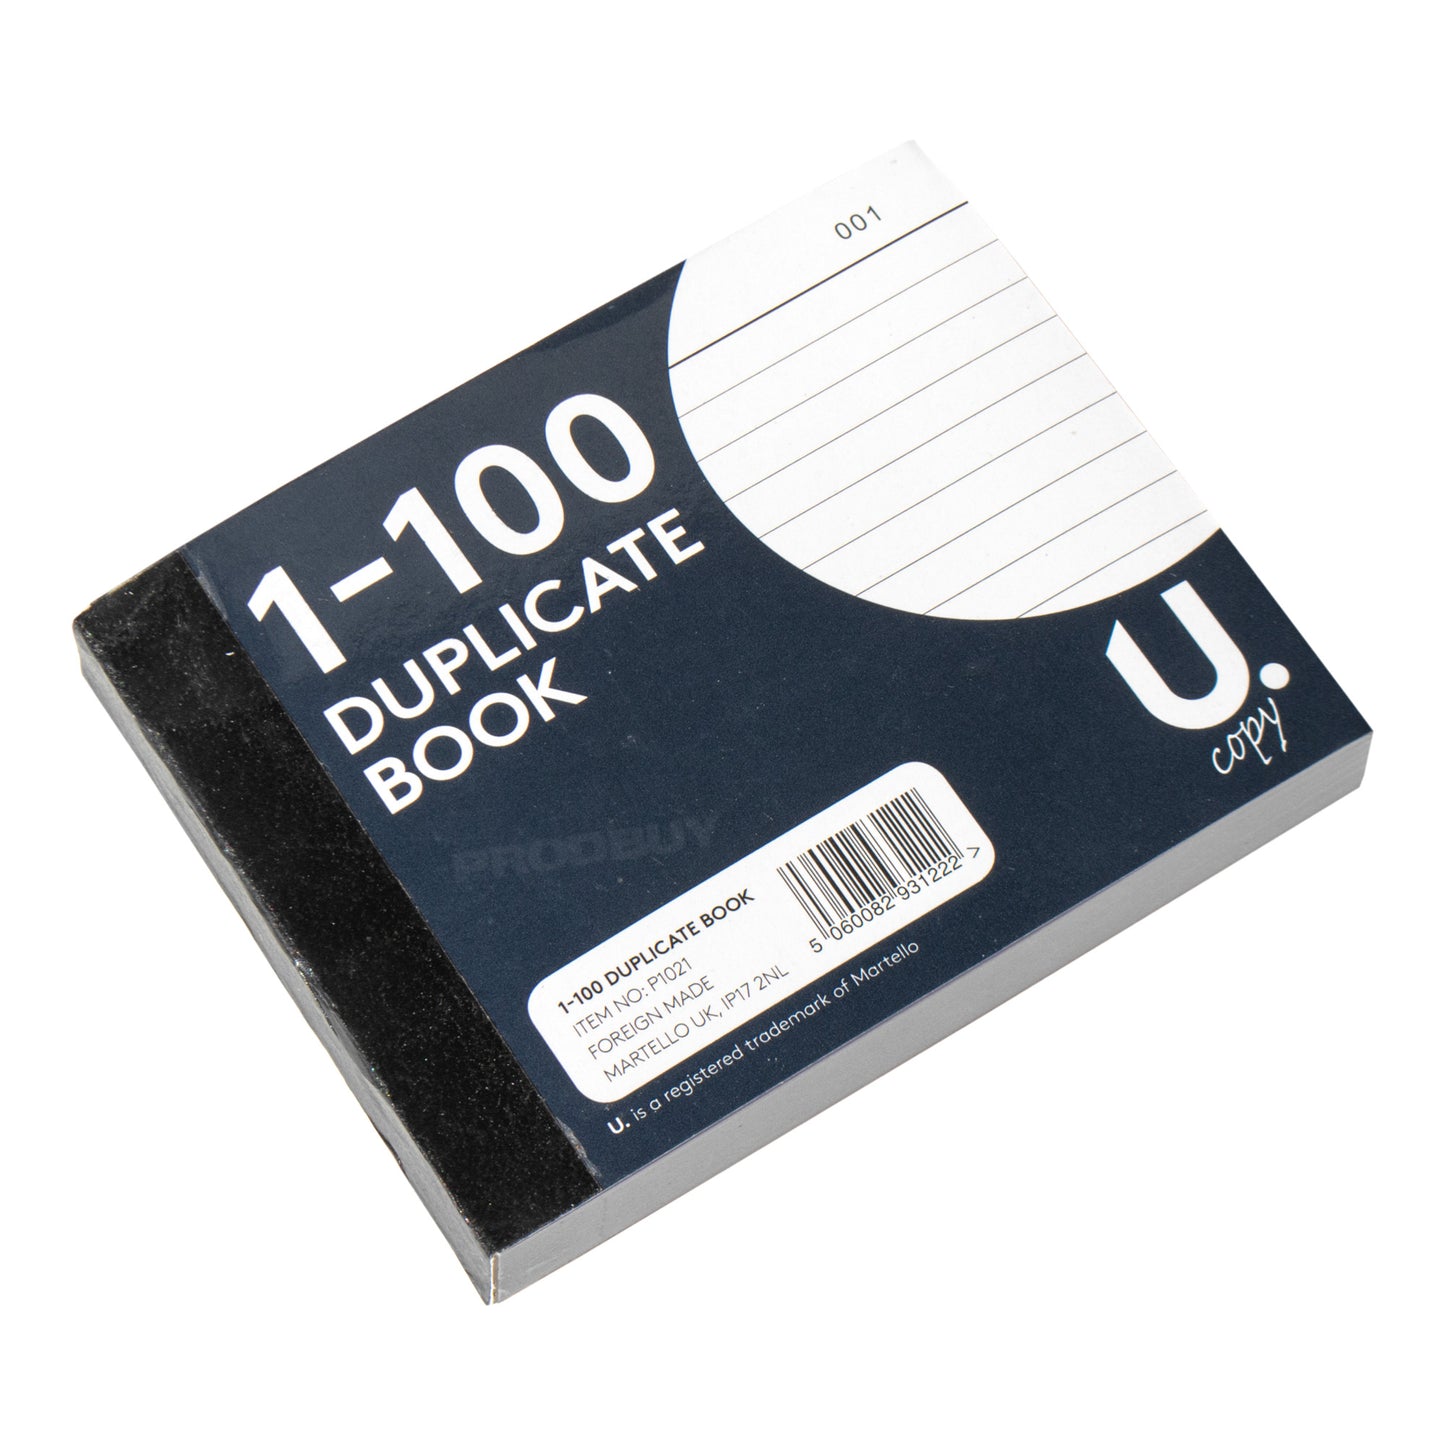 Set of 5 Duplicate Books A6 100 Sheet with Carbon Sheet Lined & Numbered Pads